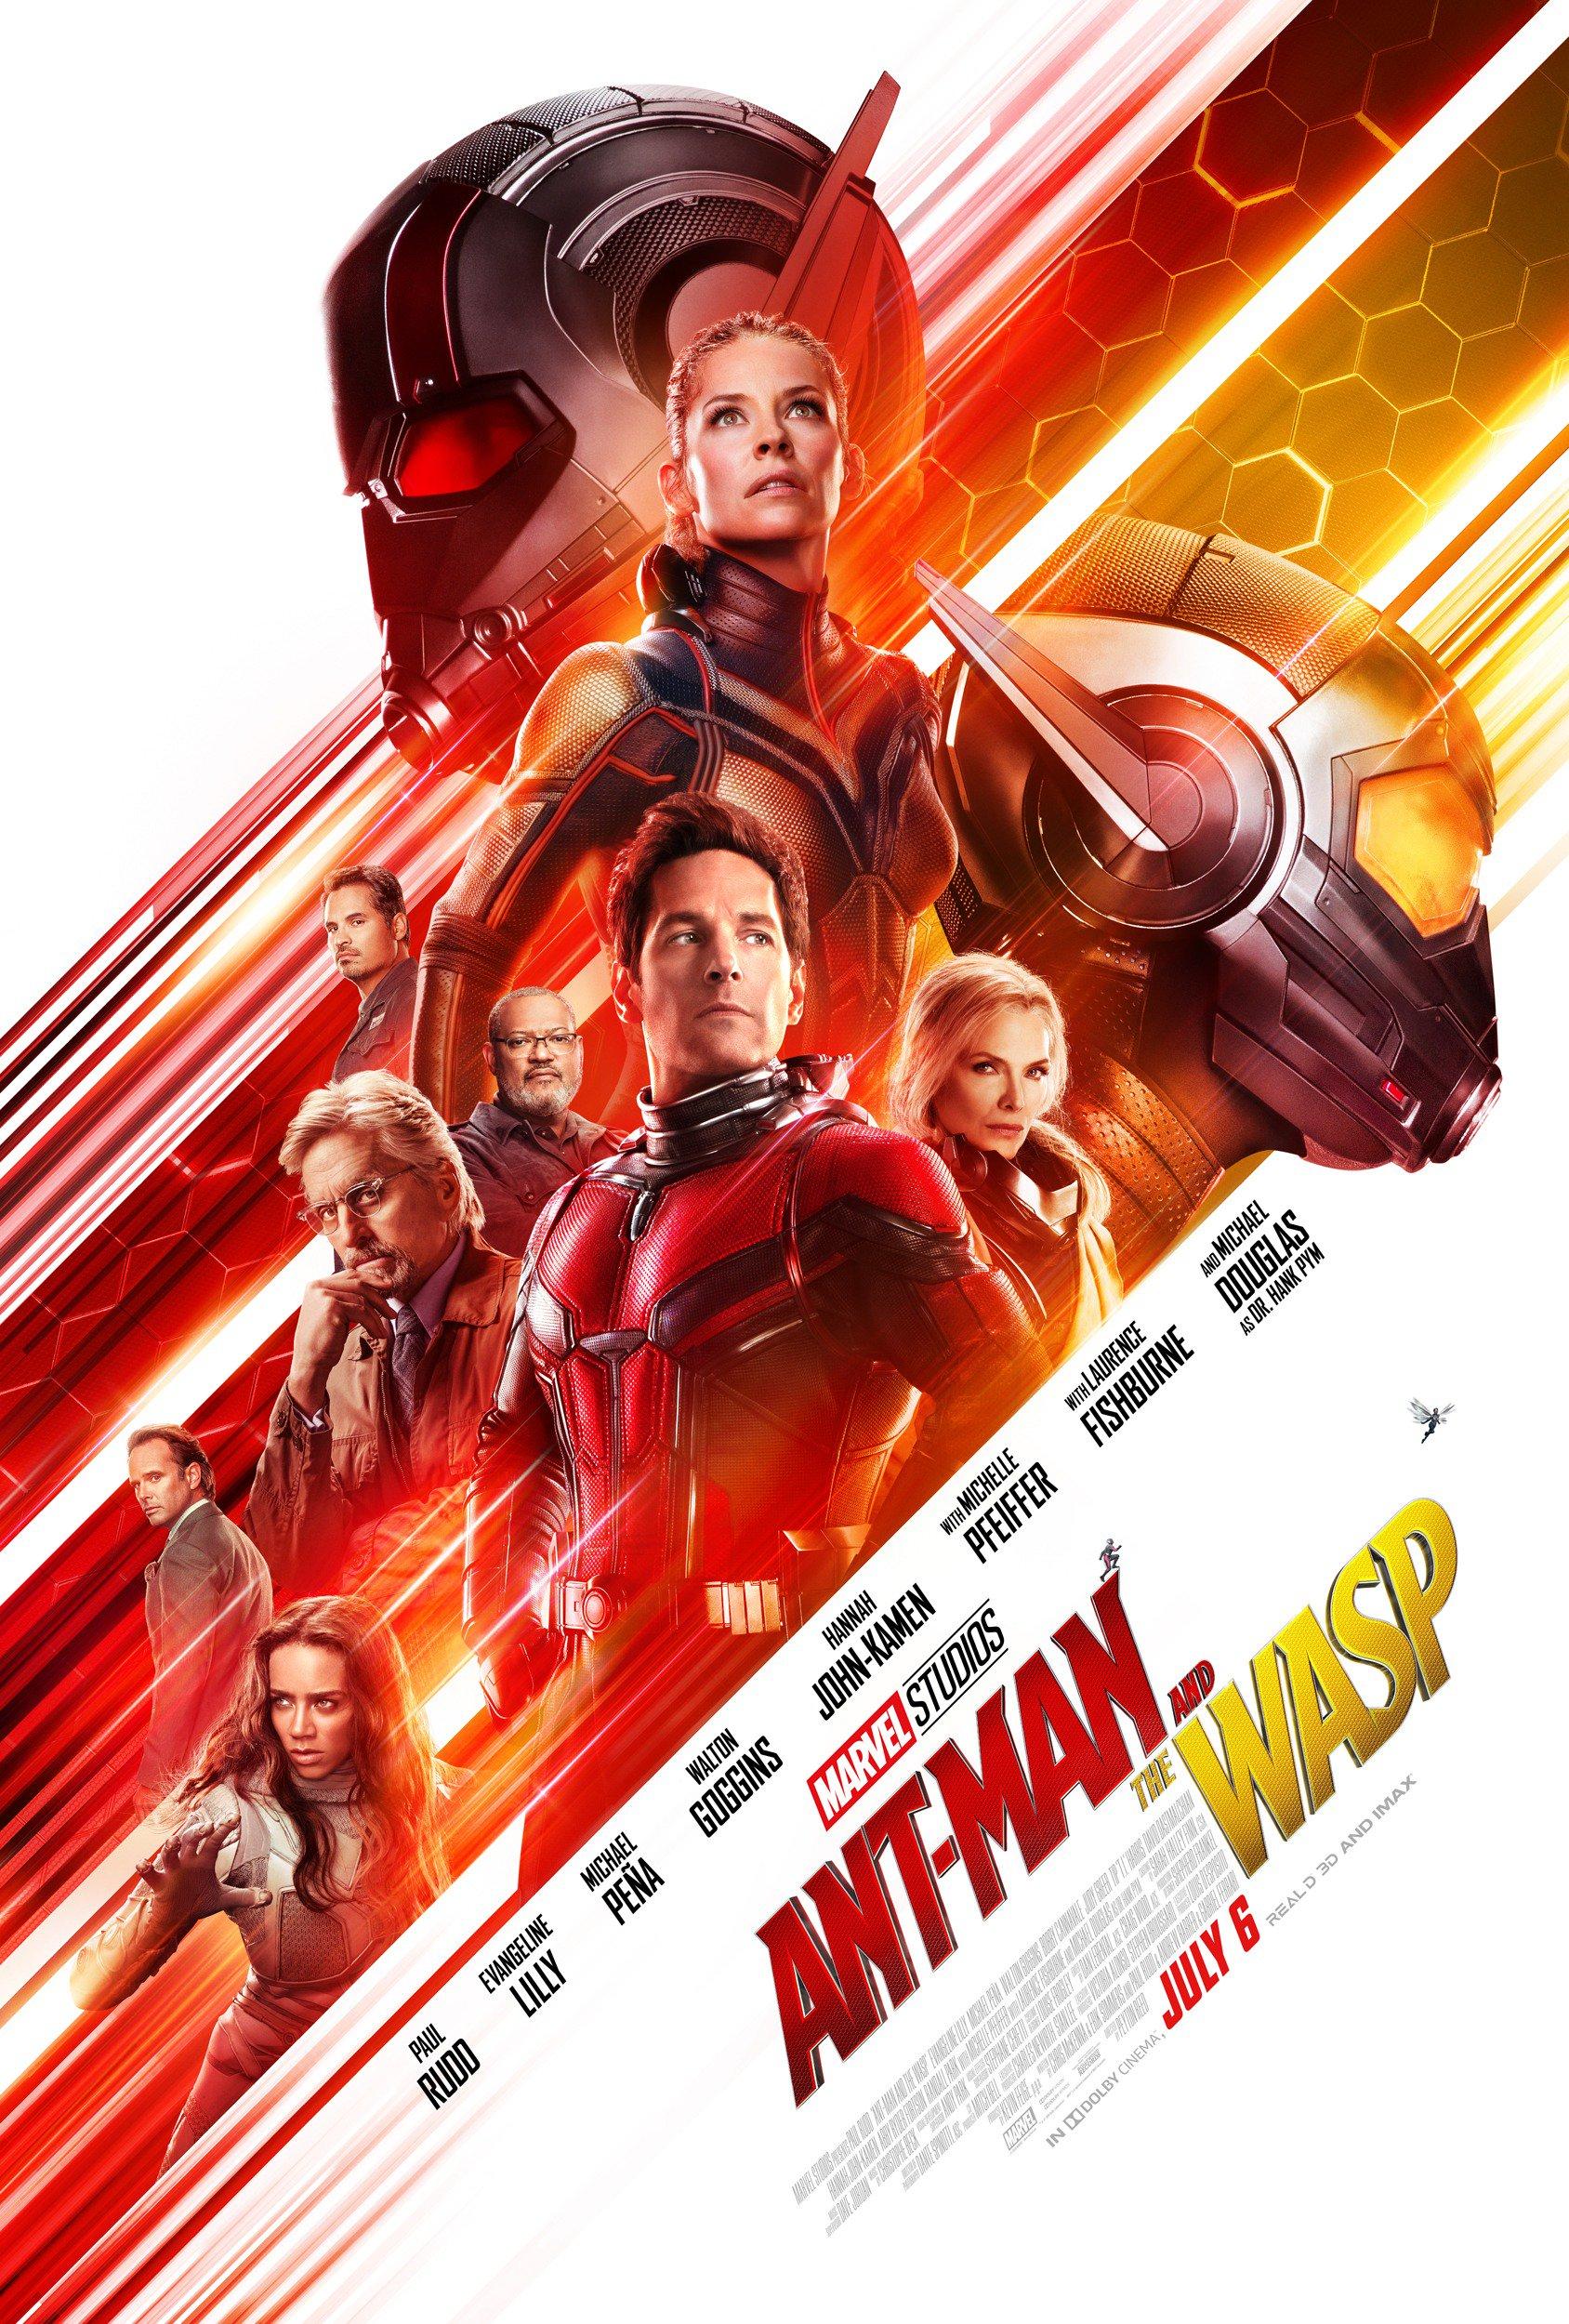 Ant-Man and the Wasp (July 6, 2018) - Rejoin Scott Lang and Hope van Dyne as they don their suits once again for a new mission involving quantum realms and a mysterious adversary.